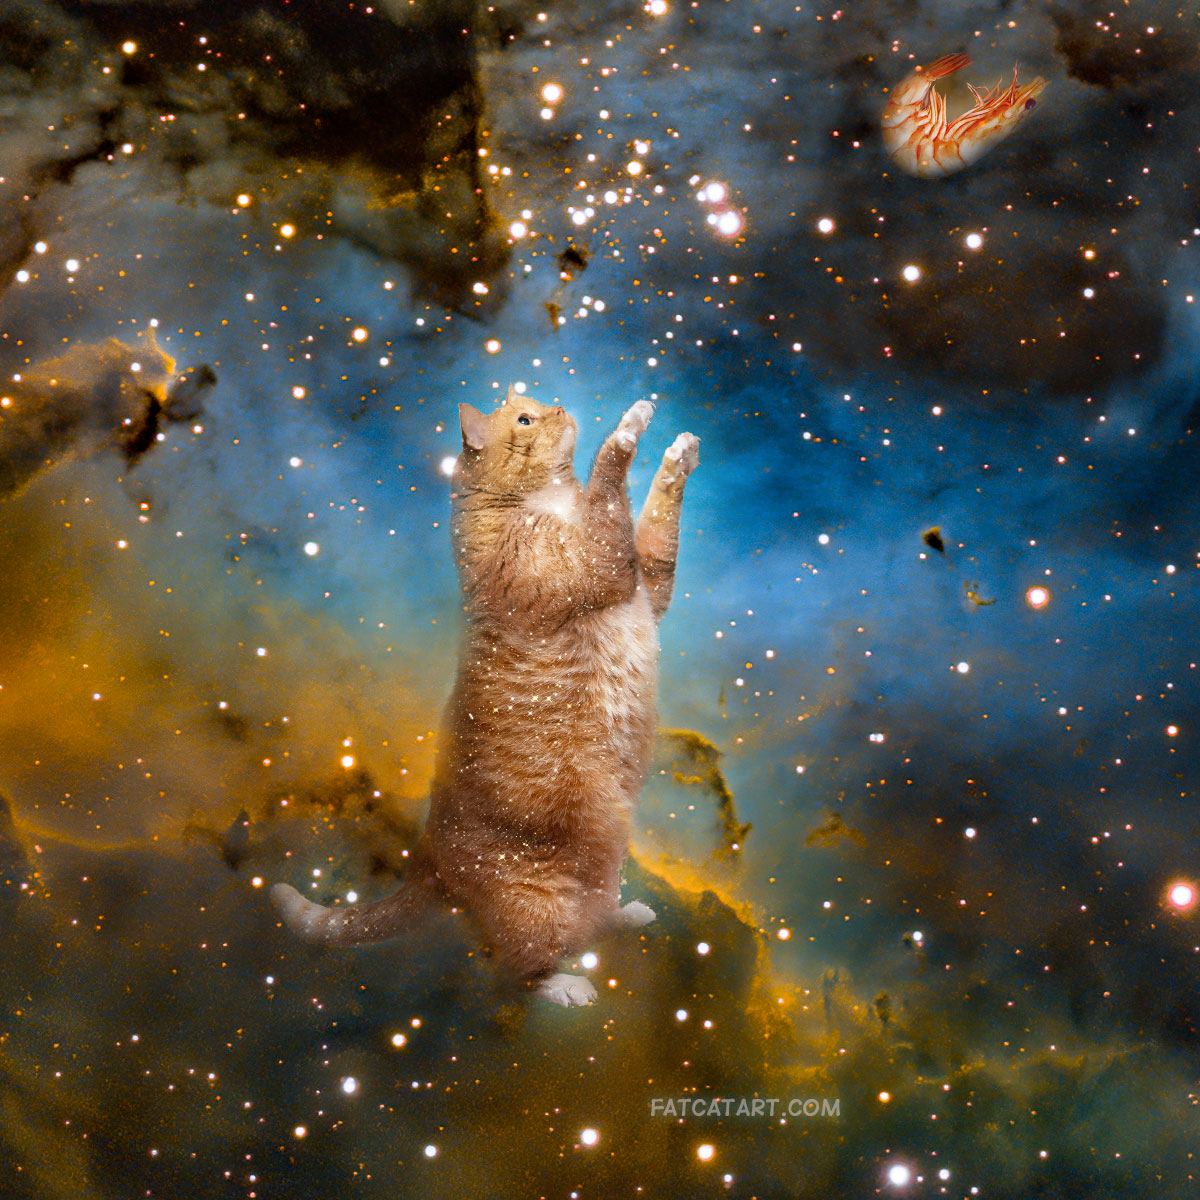 The Celestial Cat in the Pillars of Creation, the bigger picture